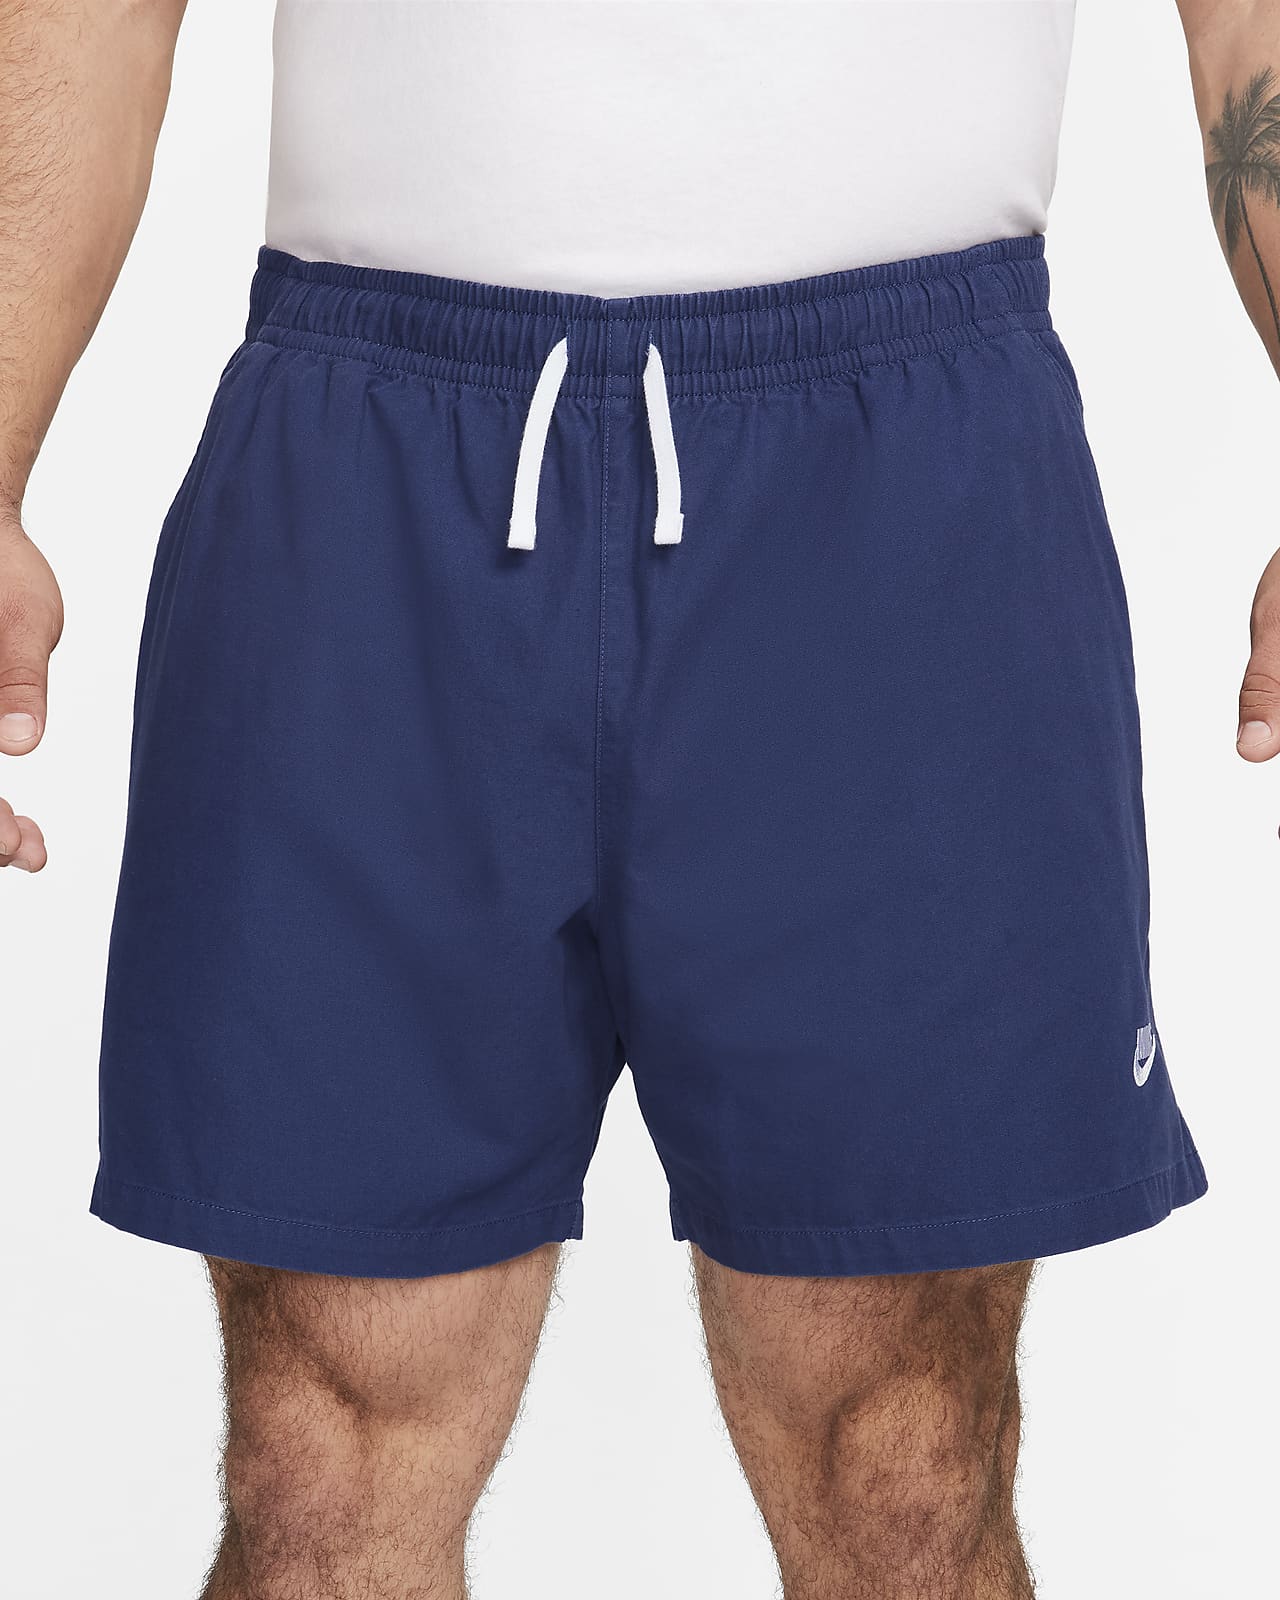 ZEO-LINE Mesh Sanitary Shorts, Factory Outlet